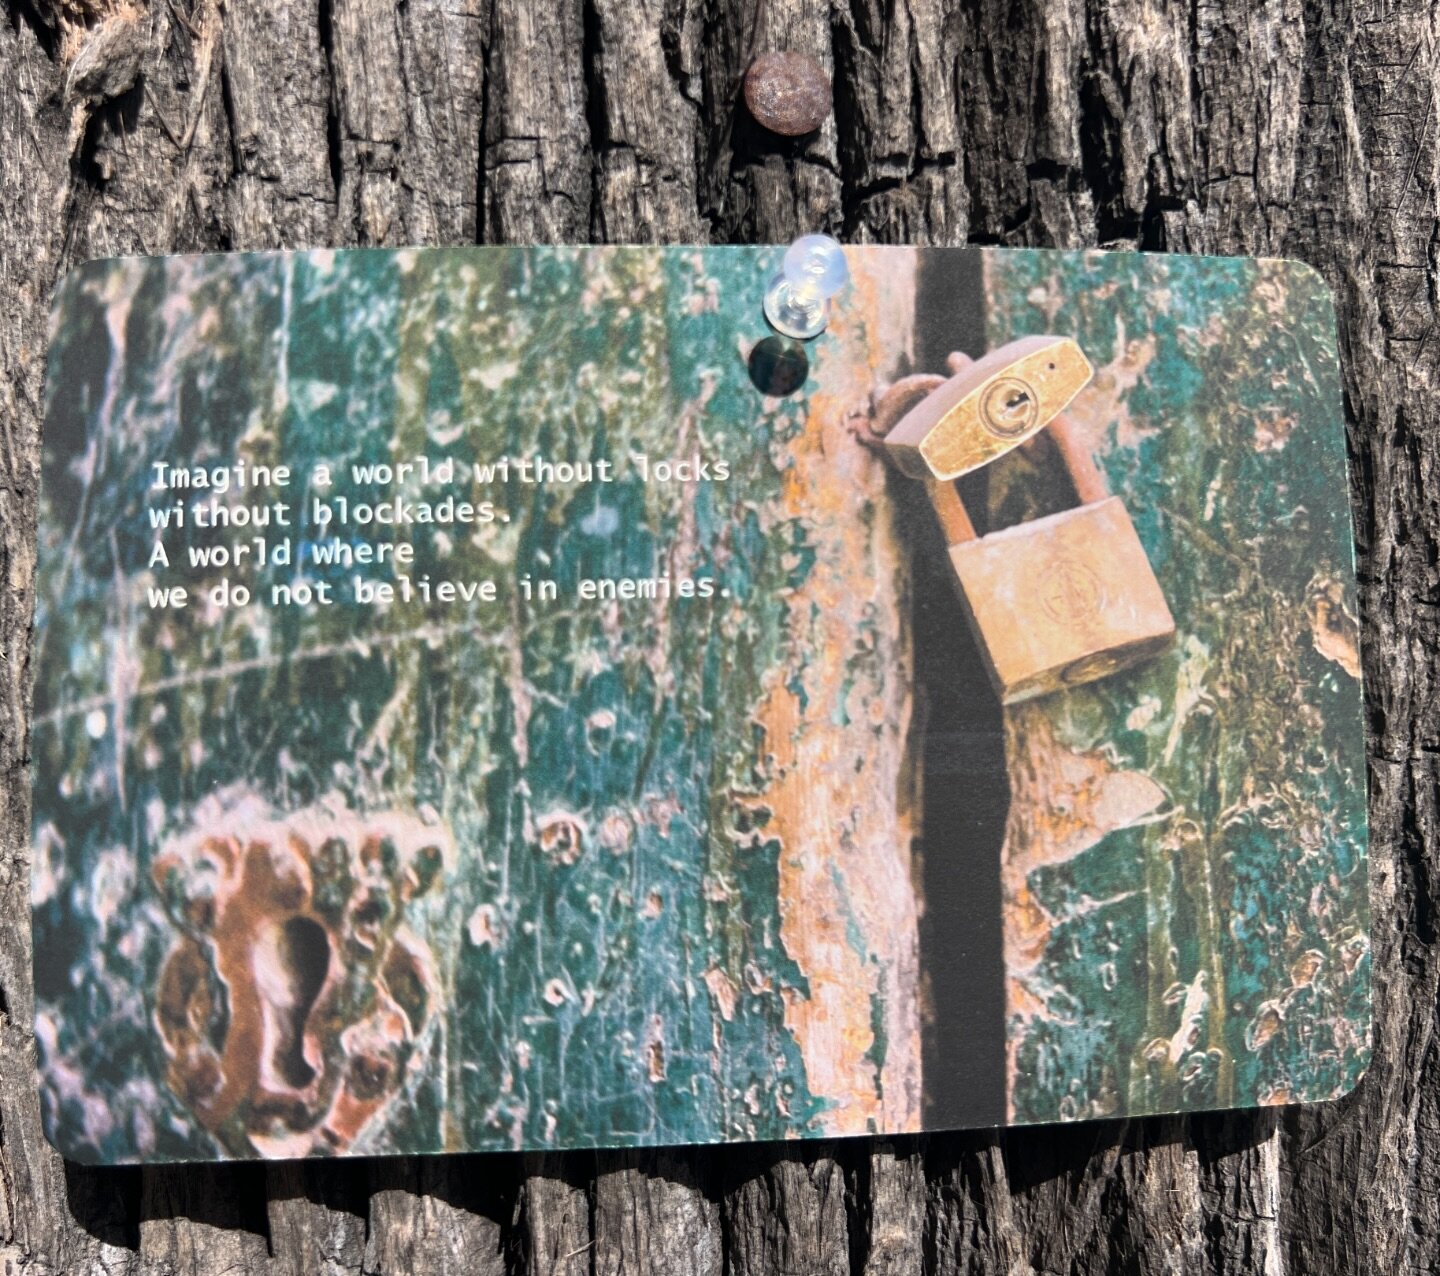 &ldquo;I imagine a world without locks, without blockades. 
A world where we do not believe in enemies.&rdquo; [sorry the text isn&rsquo;t more visible in the photo]

I created this card a decade ago while wandering streets in Italy for an artist res